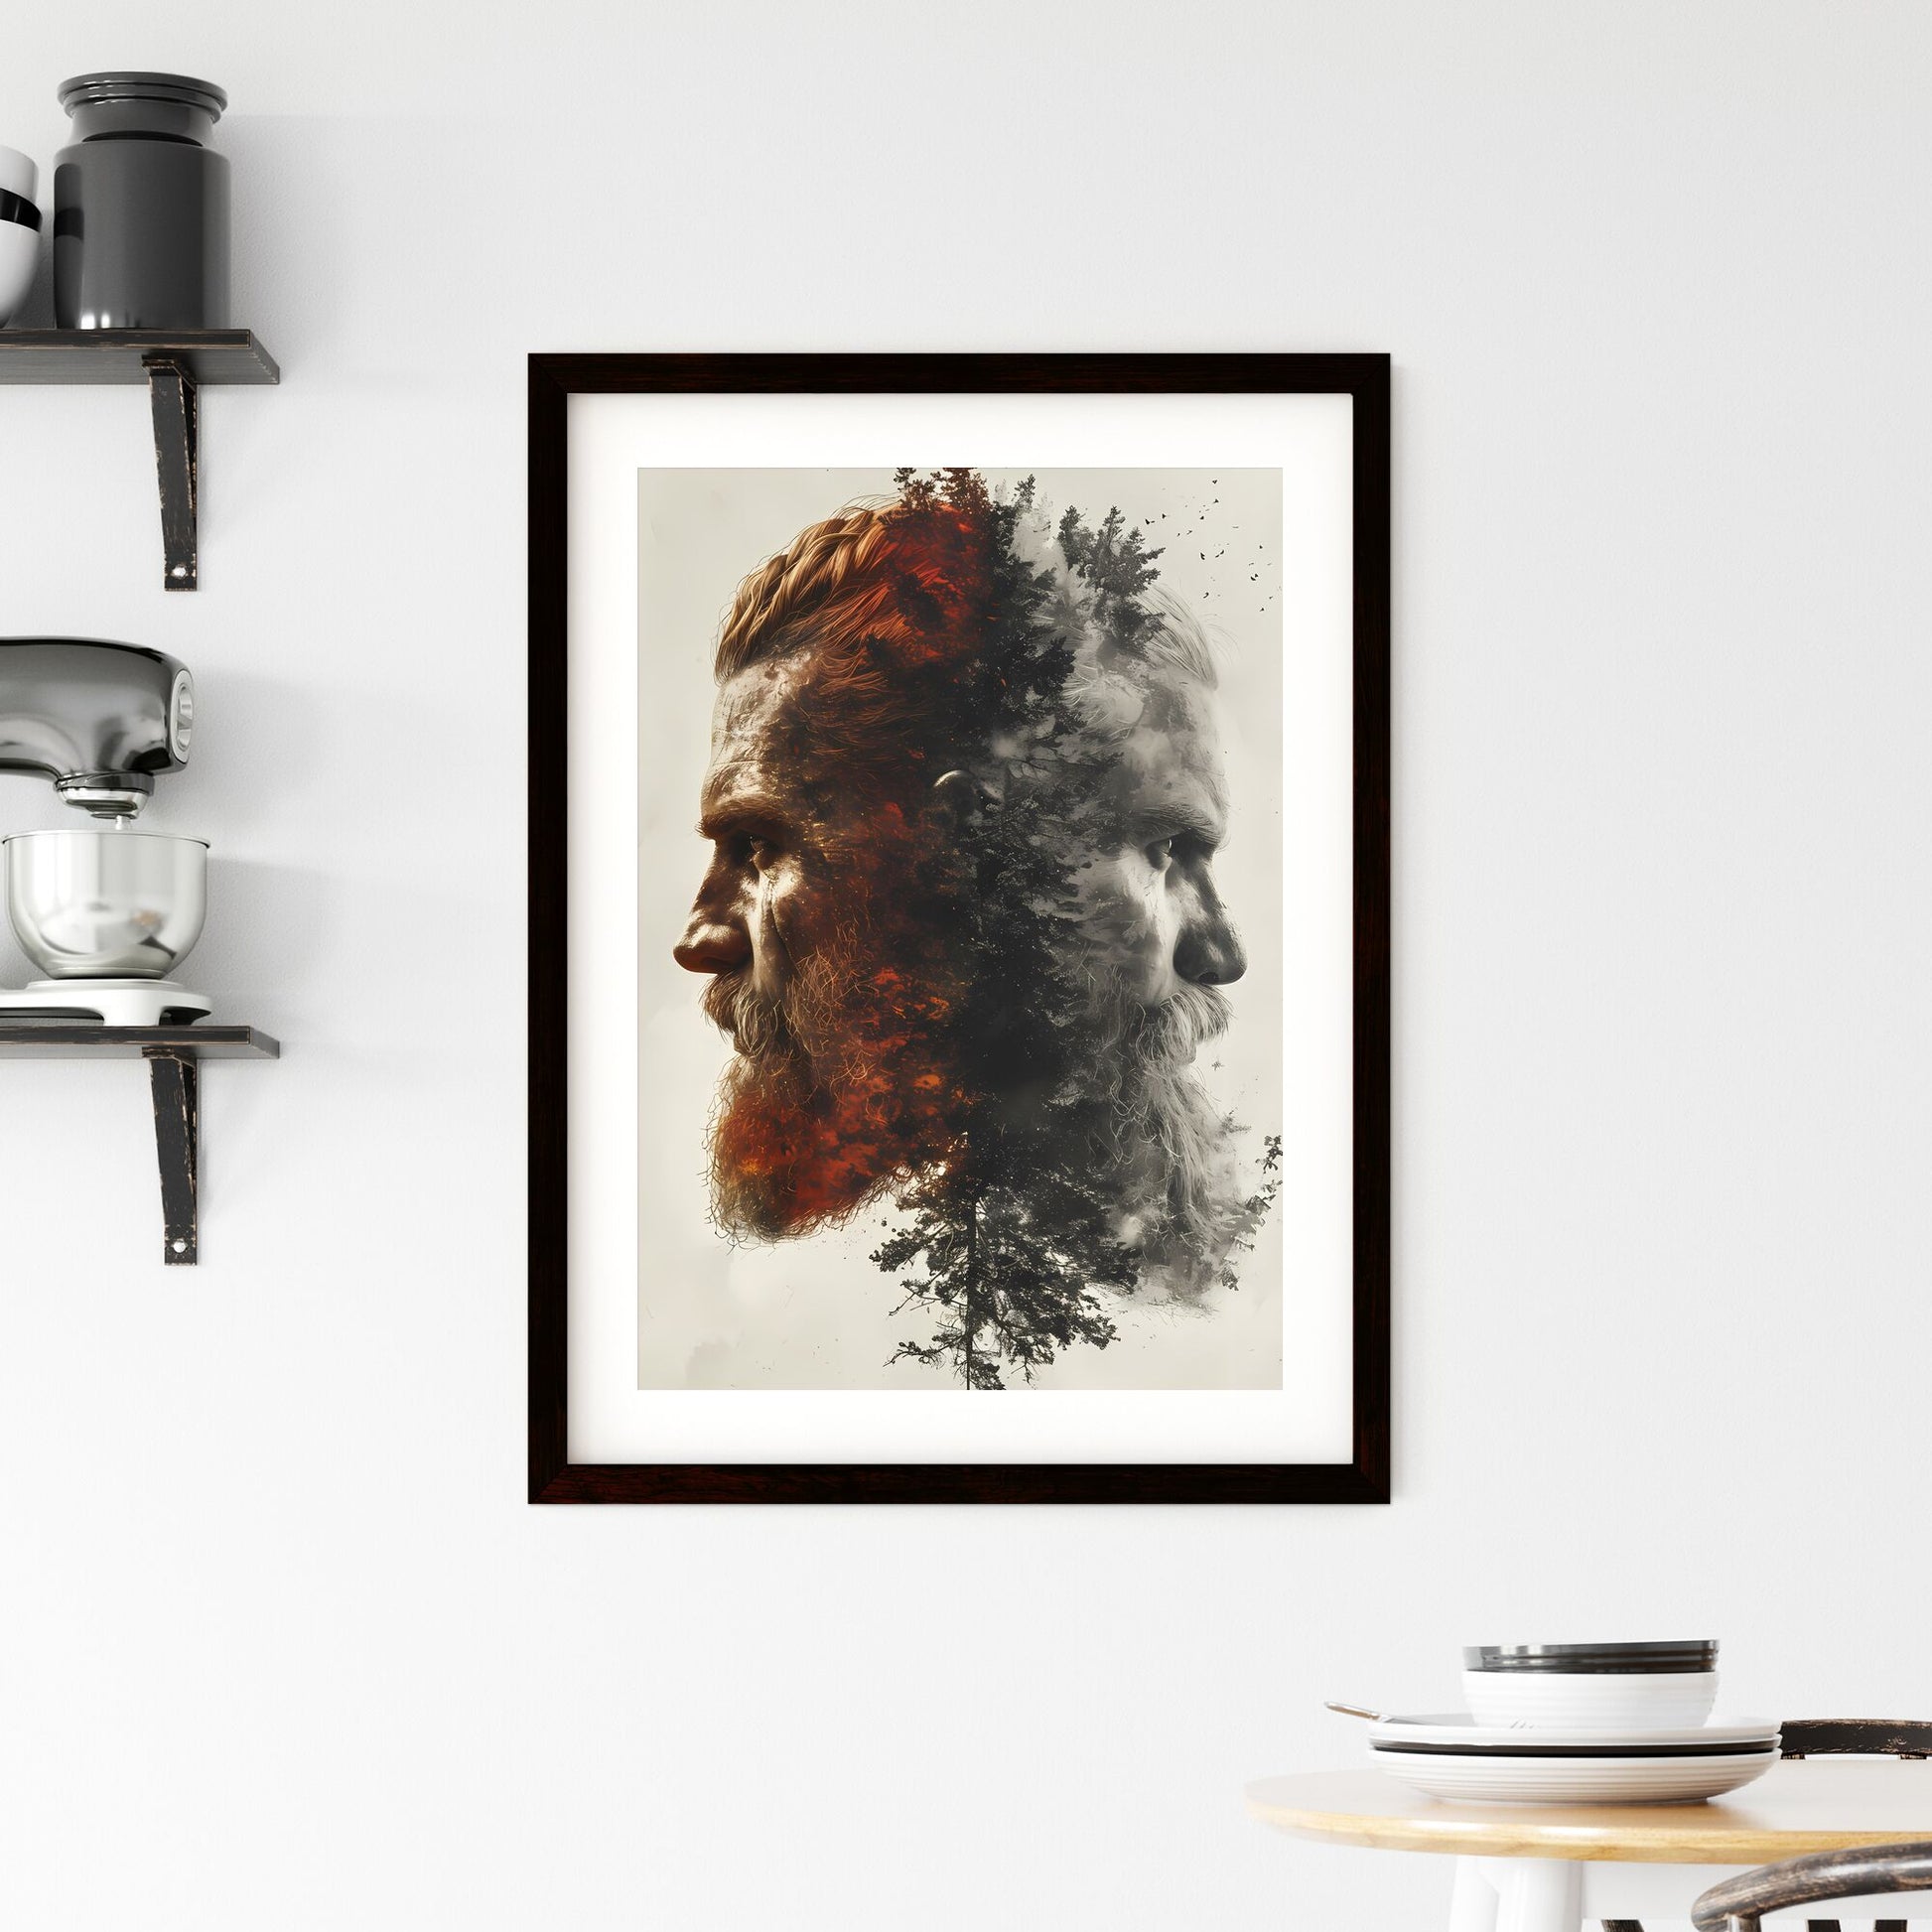 Half man half creature - Art print of a man with a beard and a tree Default Title